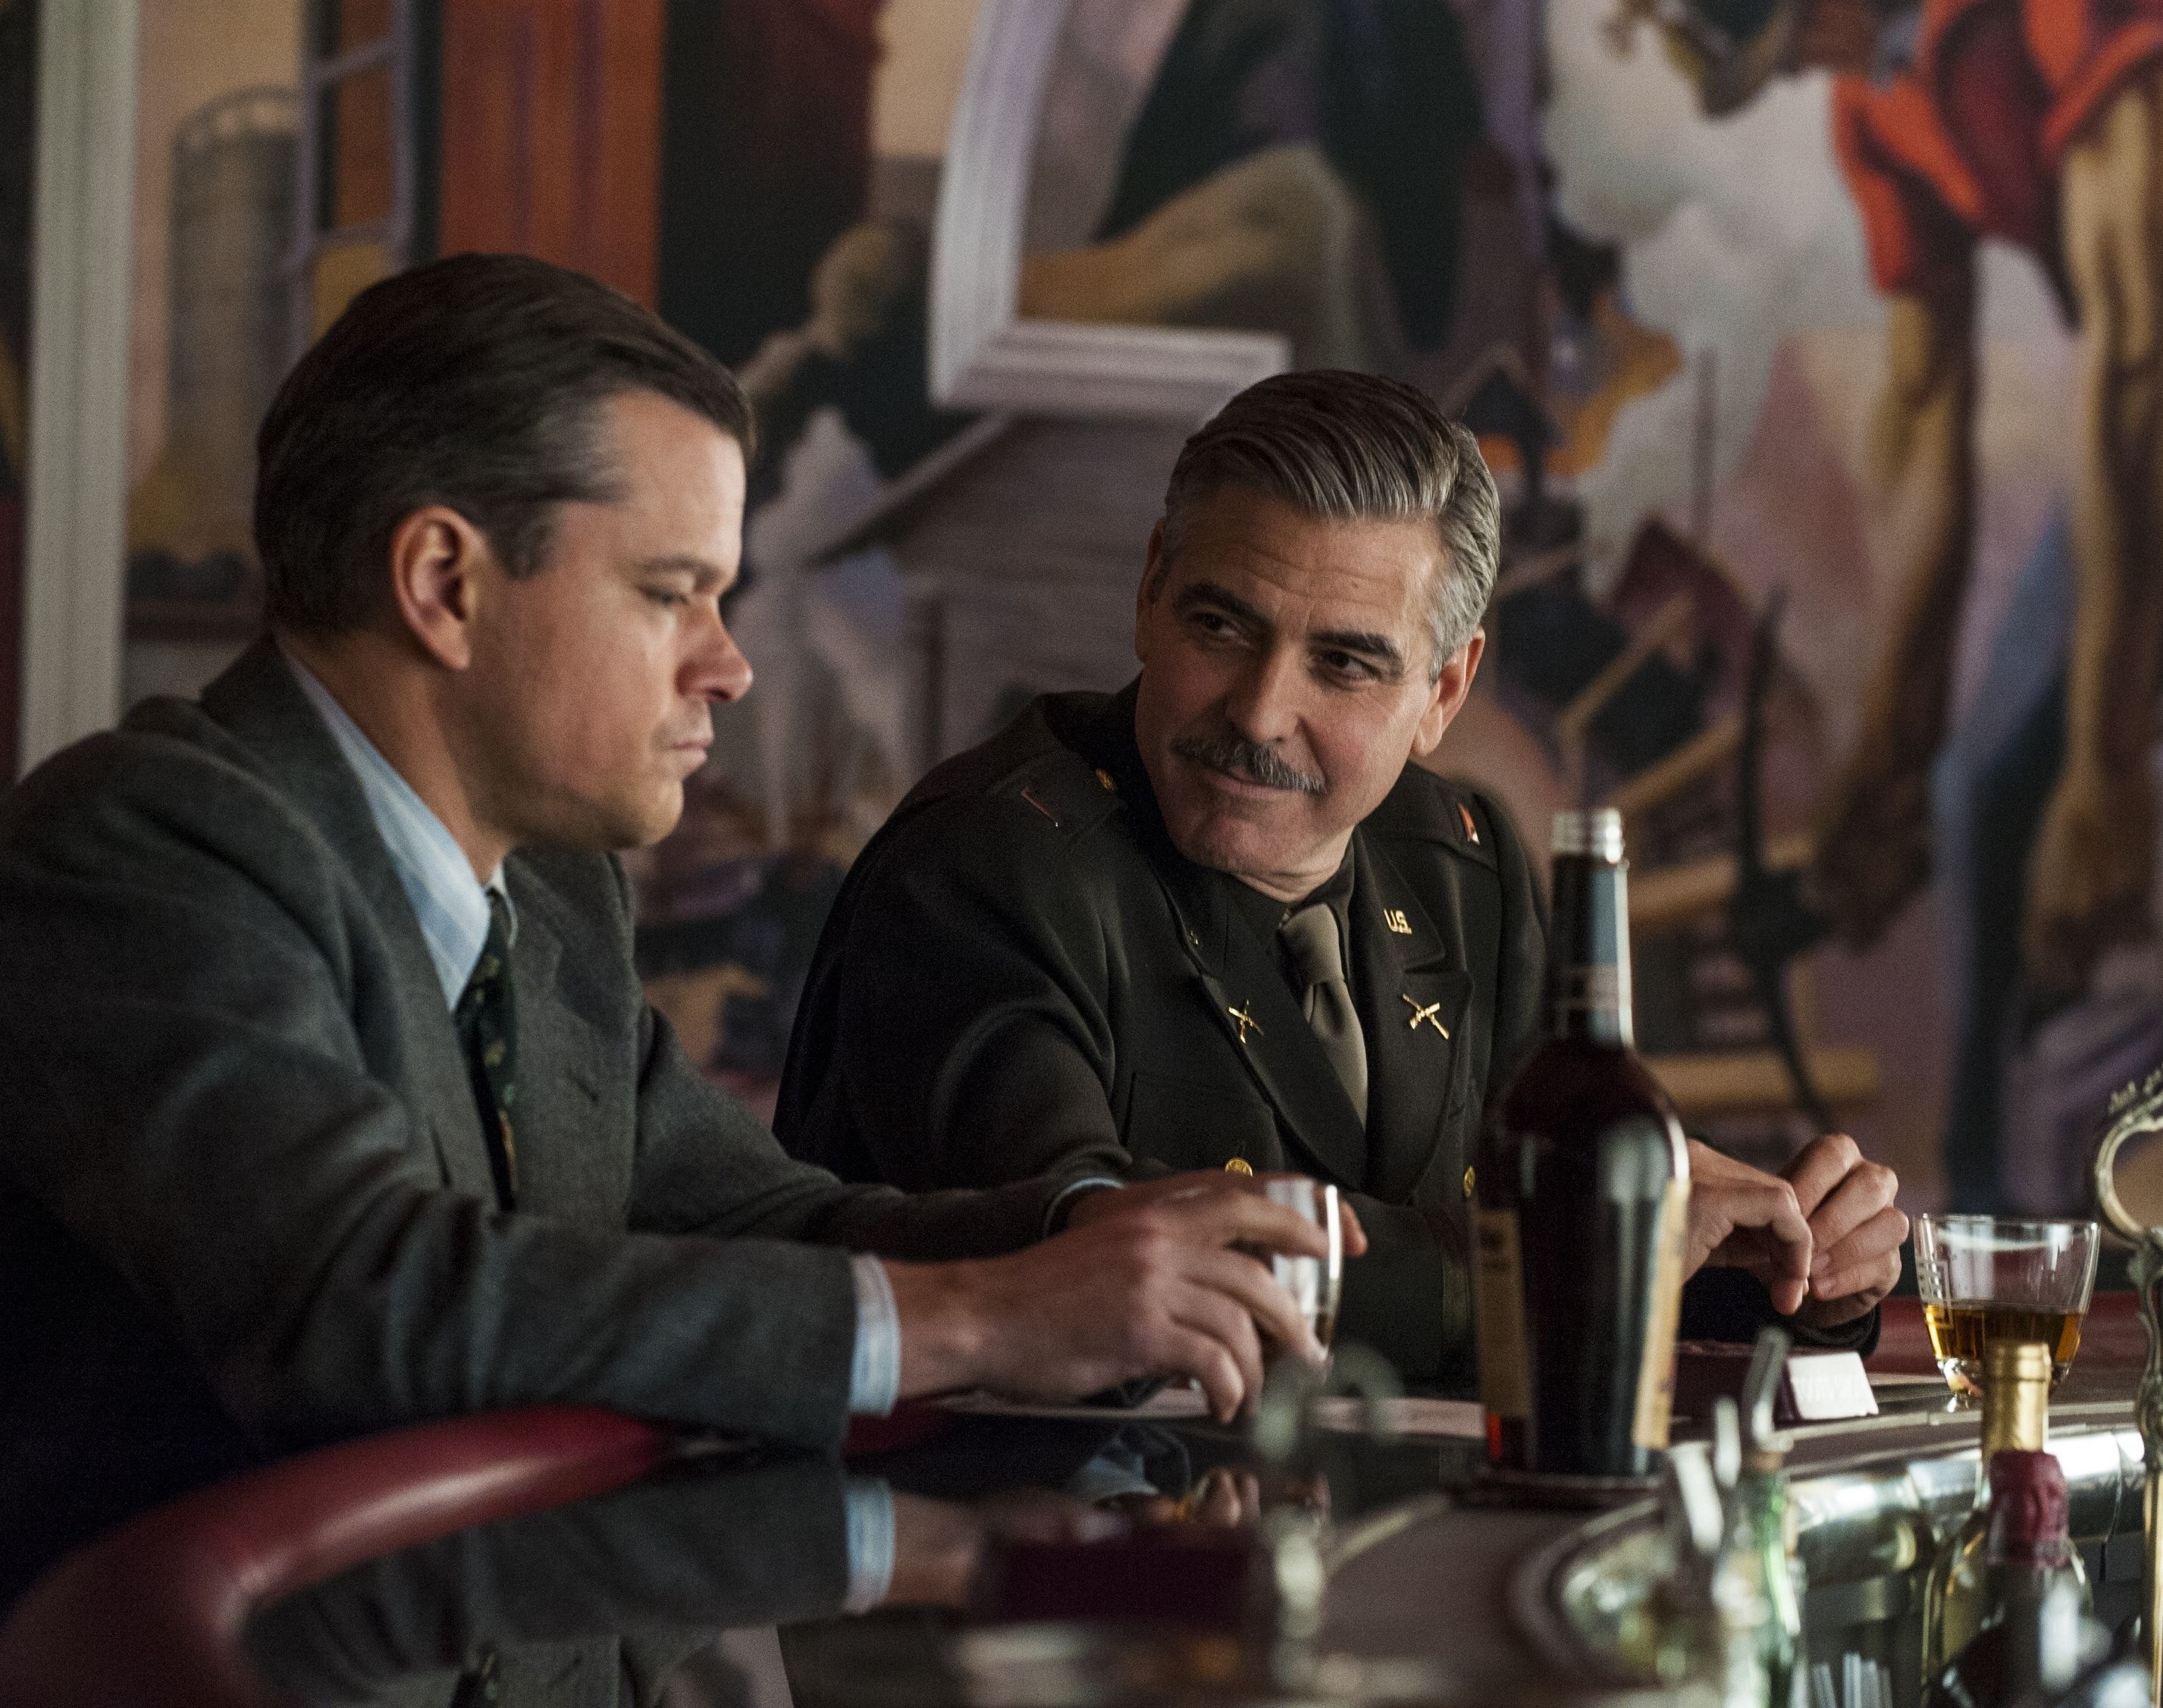 Matt Damon and George Clooney have a drink